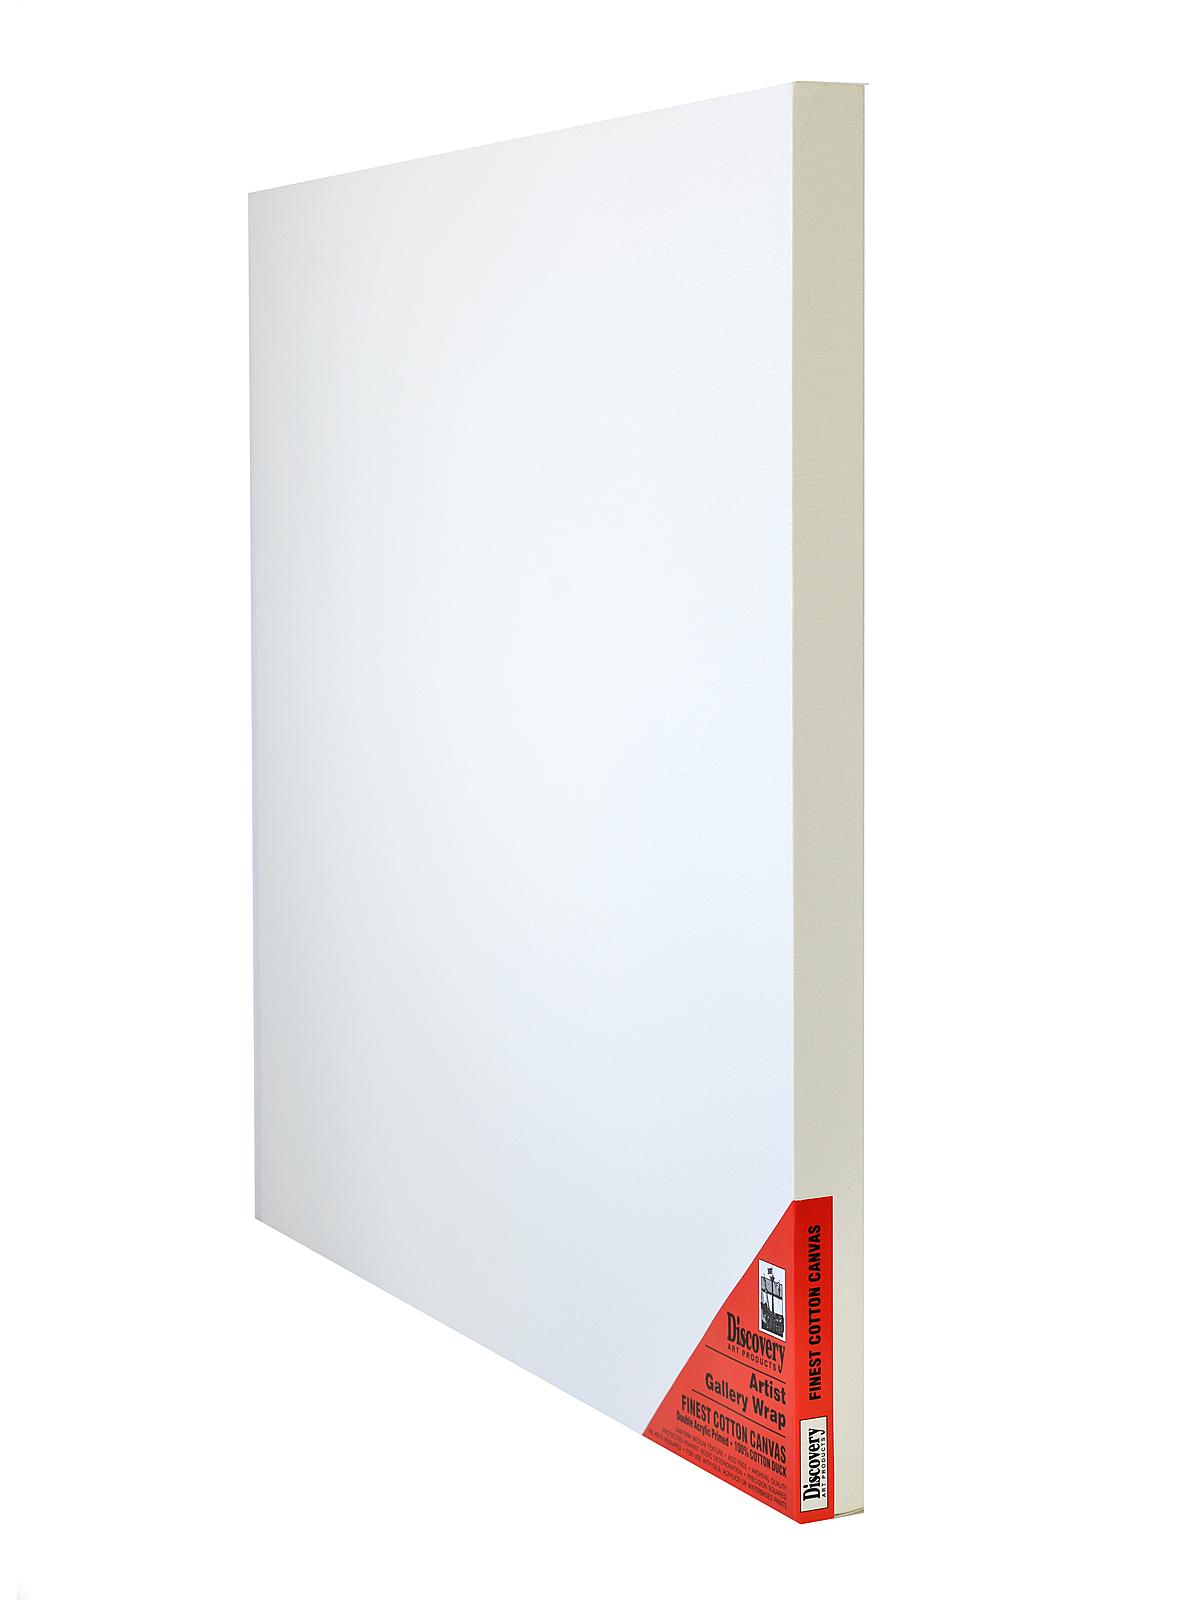 Gallery Stretch Canvas 24 In. X 24 In.